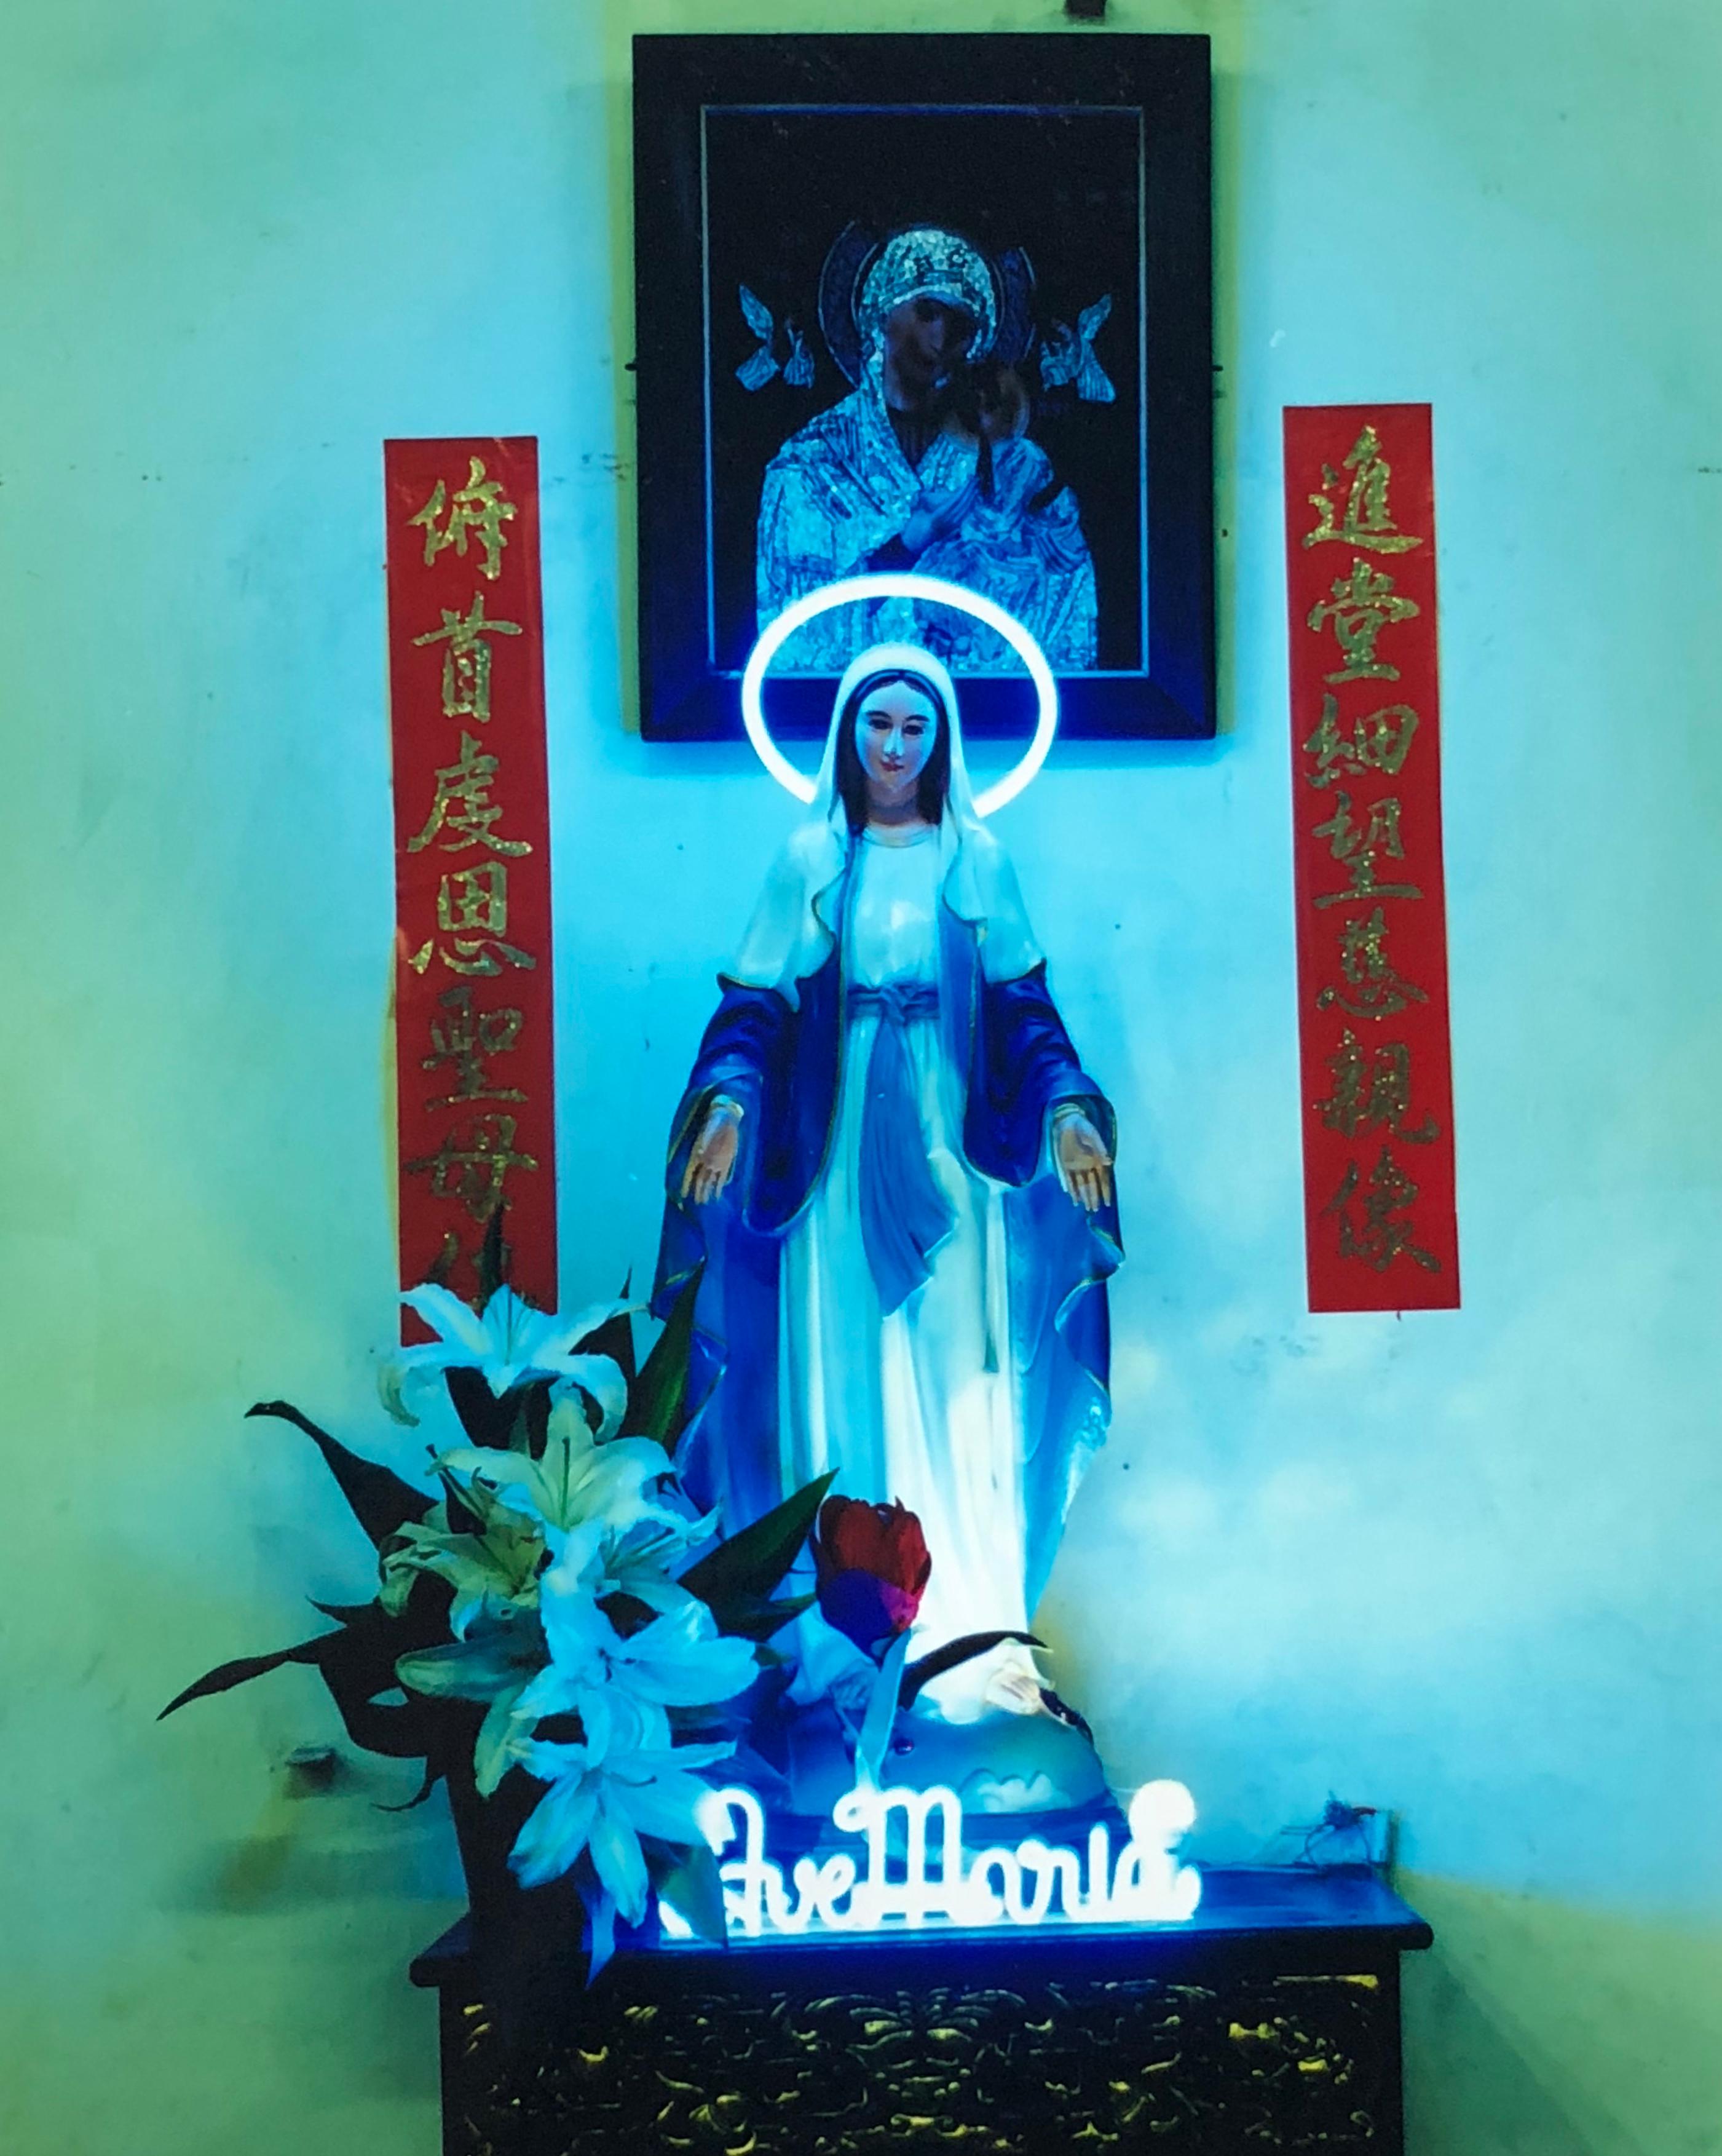 Ave Maria, part of Richard Heeps' 'This is Not America' series photographed in Vietnam in 2016. This striking artwork has a fun religious kitsch vibe, the neon really makes it pop.

This artwork is a limited edition of 25, gloss photographic print,